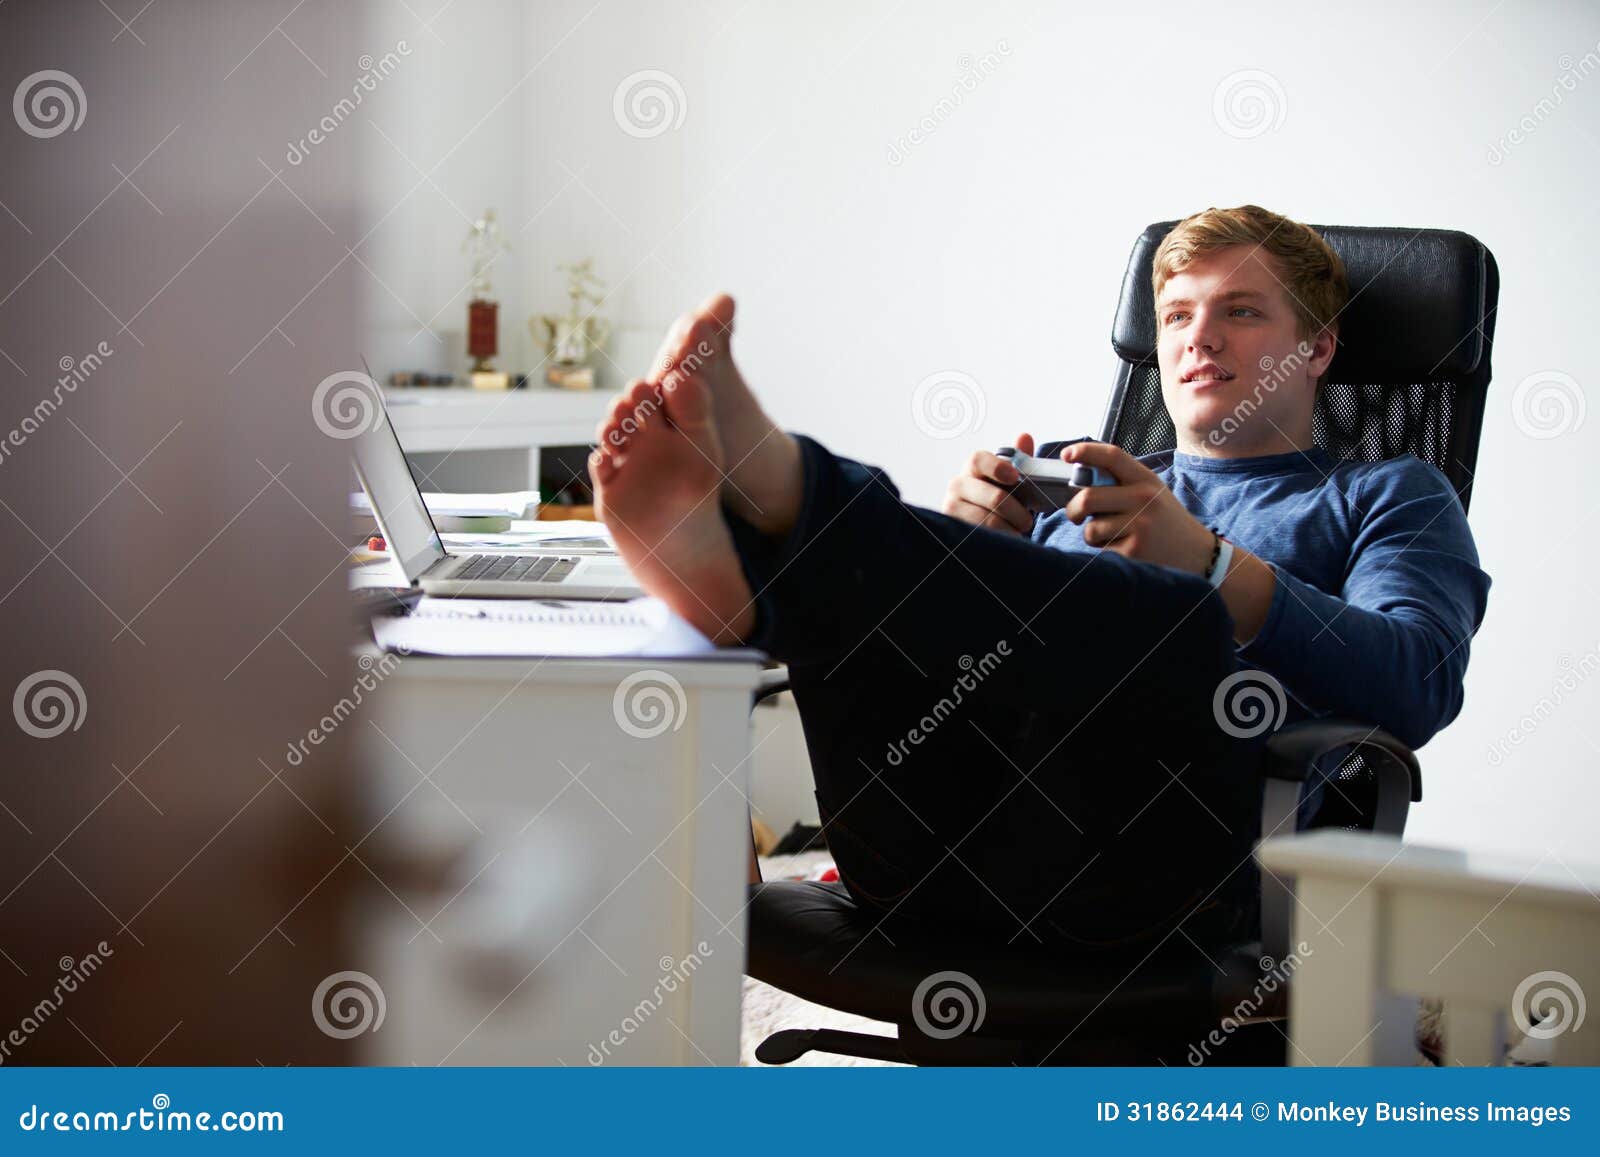 Boy Playing Video Game In Bedroom Stock Images - Image: 31862444